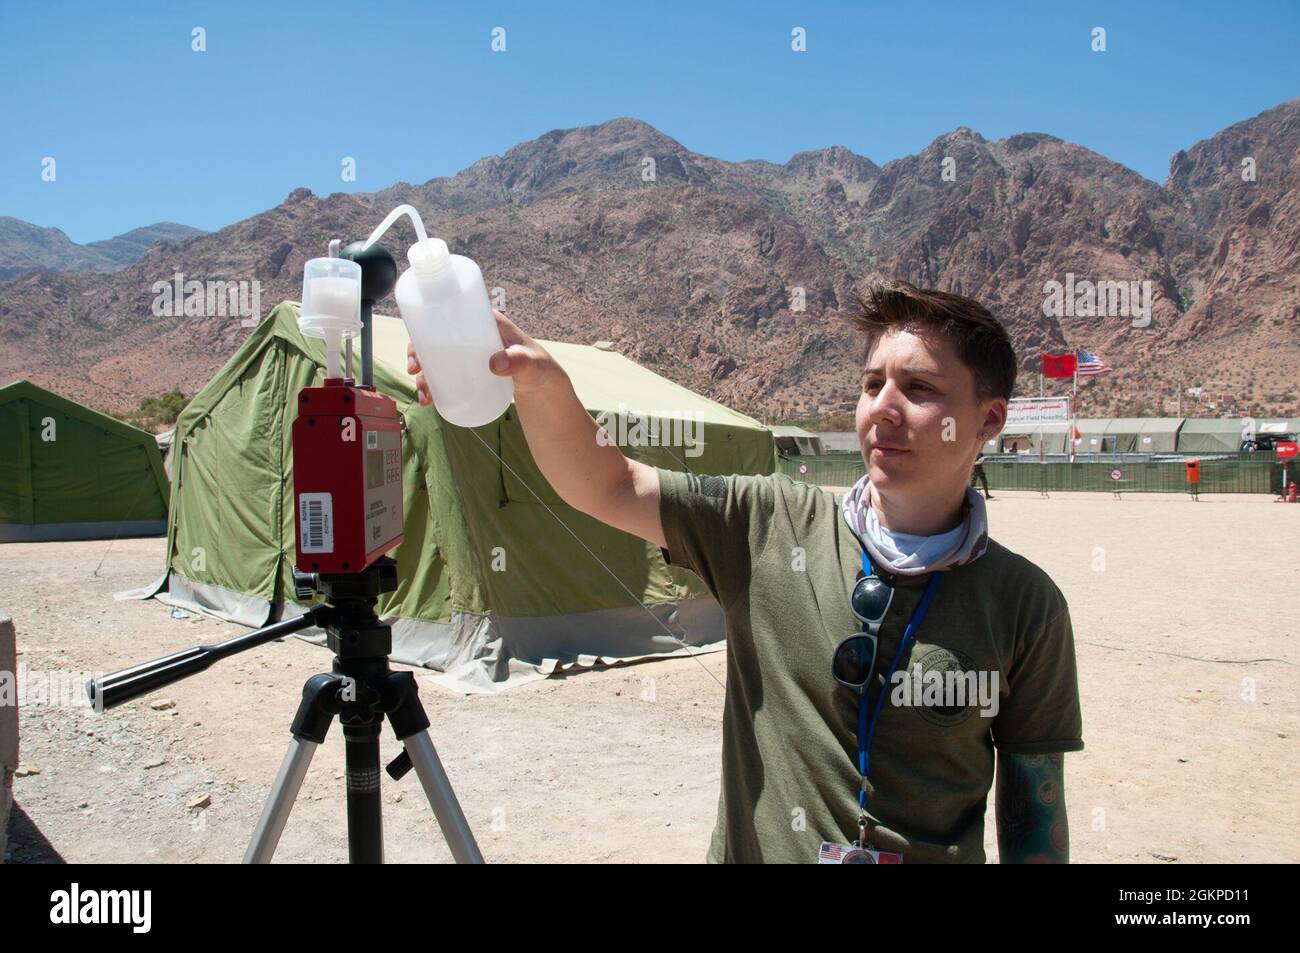 U.S. Air Force Staff Sgt. Jami Pepe, a bioenvironmental technician with the 151st Medical Group adds distilled water to the humidity reservoir of a Wet Bulb Globe Temperature measurement device in Tafraoute, Morocco on June 12, 2021 during African Lion 2021. African Lion 2021 is U.S. Africa Command’s largest, premier, joint, annual exercise hosted by Morocco, Tunisia, and Senegal, 7-18 June. More than 7,000 participants from nine nations and NATO train together with a focus on enhancing readiness for us and partner nation forces. AL21 is multi-domain, null-component, and multinational exercise Stock Photo